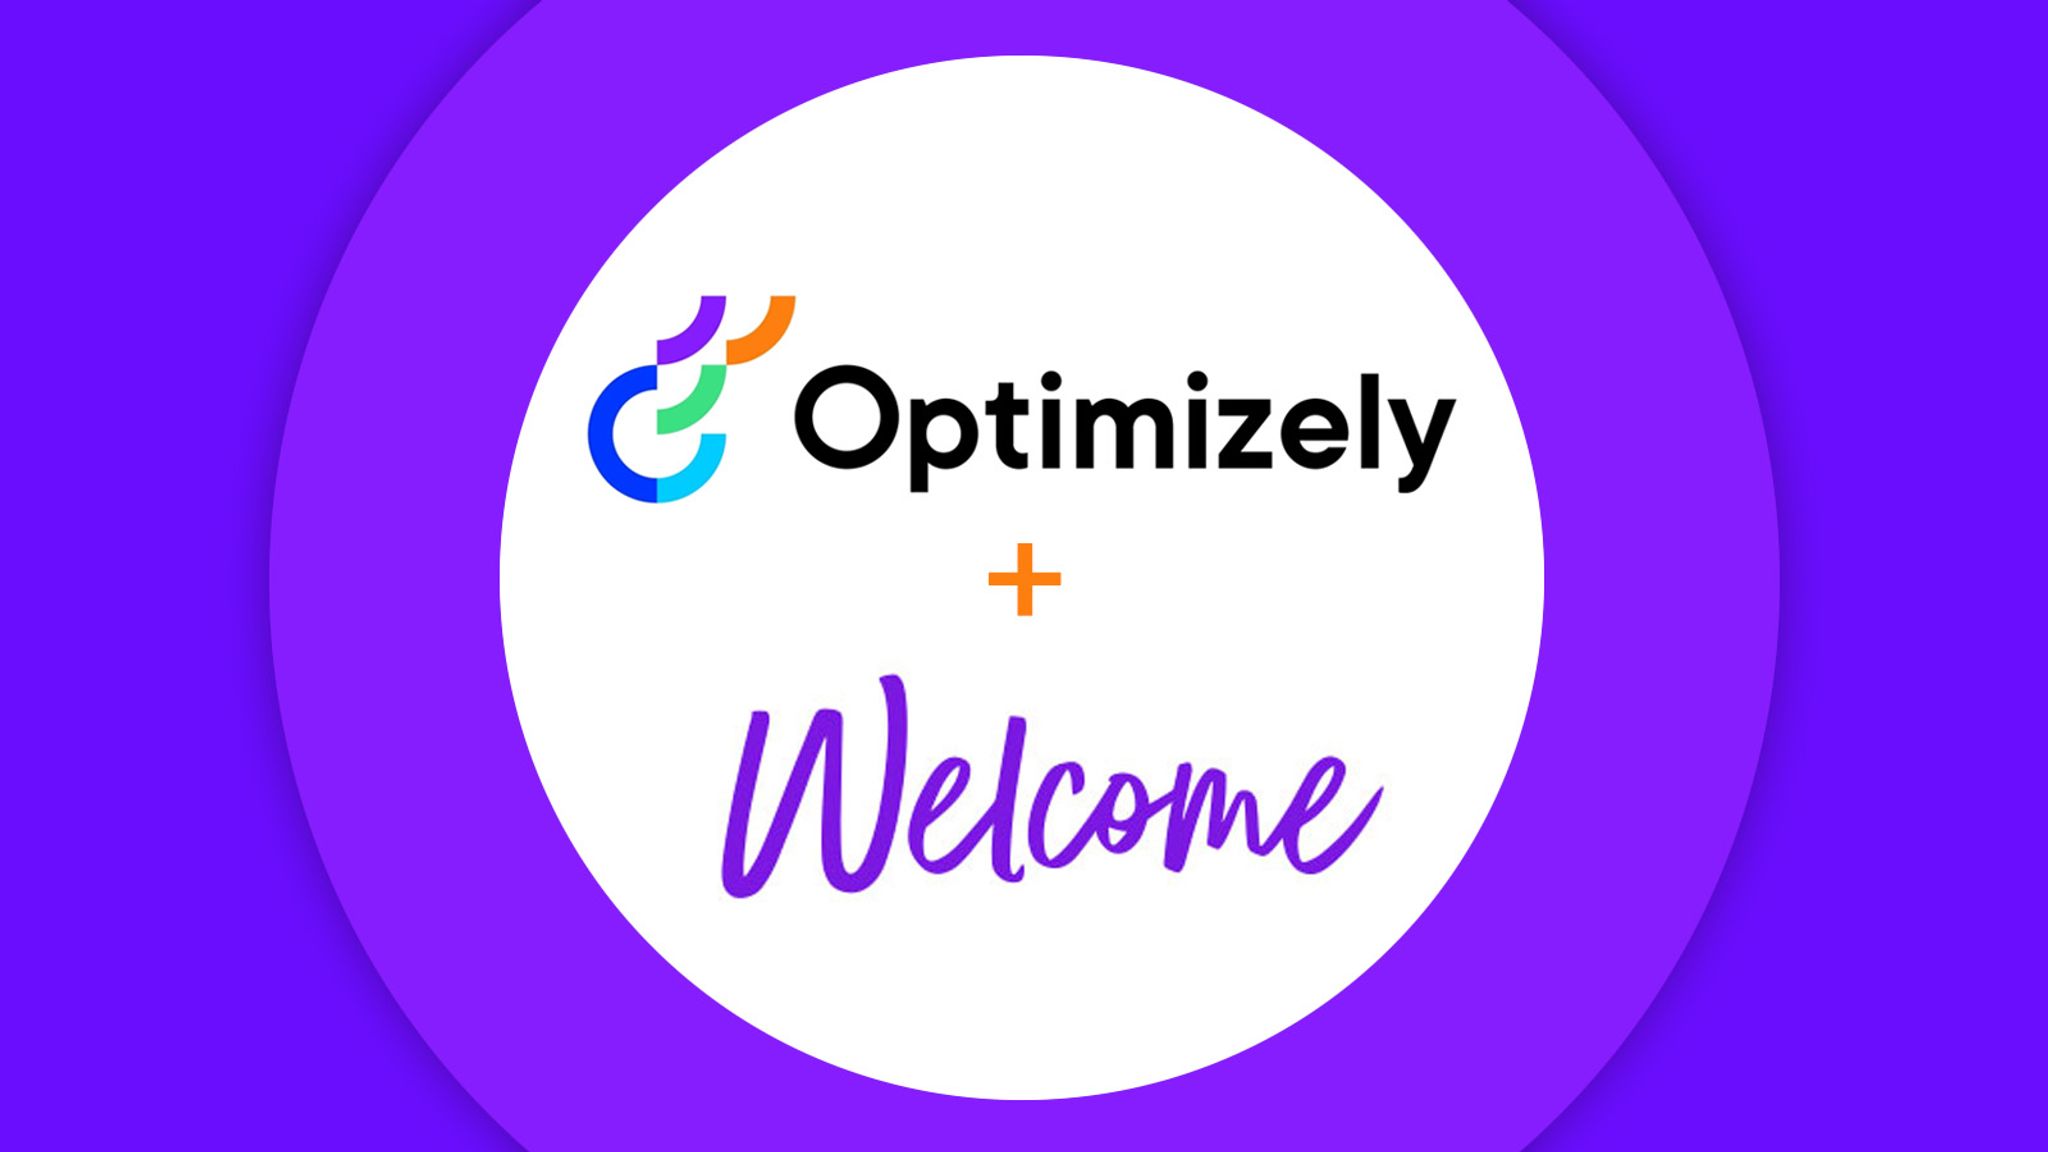 Optimizely and Welcome logos